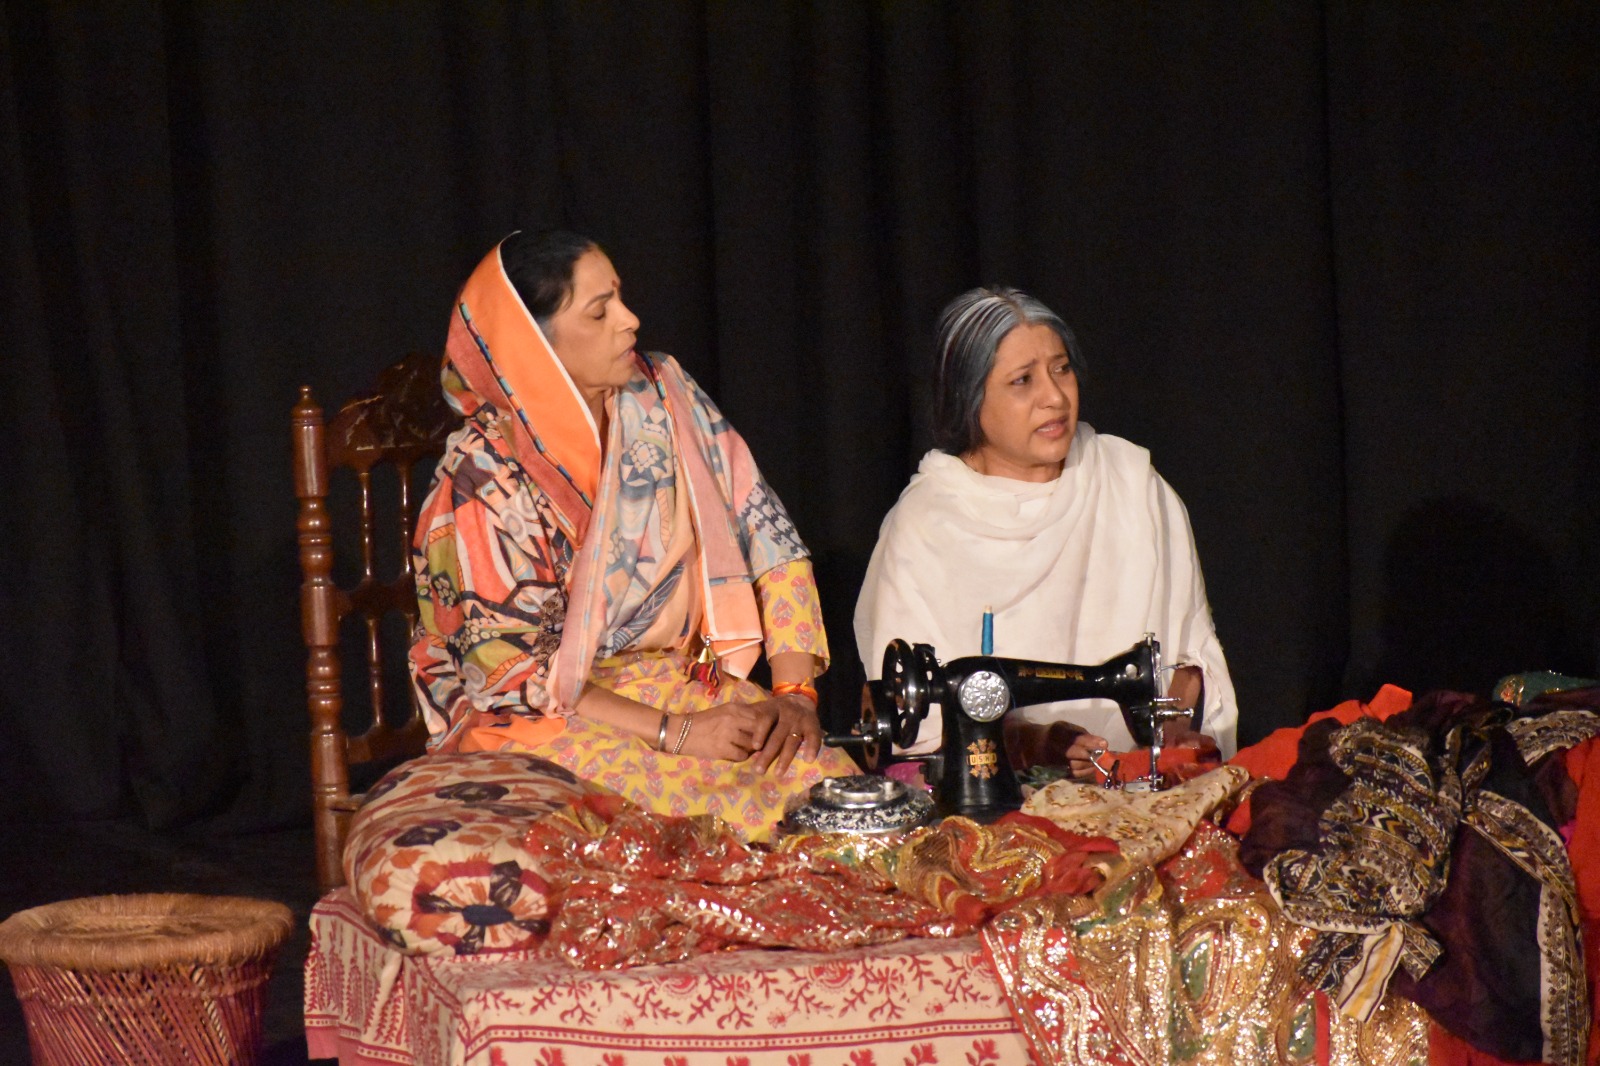 https://www.hindi.awazthevoice.in/upload/news/170350728521_An_attempt_to_make_the_society_aware_through_the_theatrical_adaptation_of_Ismat_Chughtai's_‘Chauthi_Ka_Joda’_2.jpg